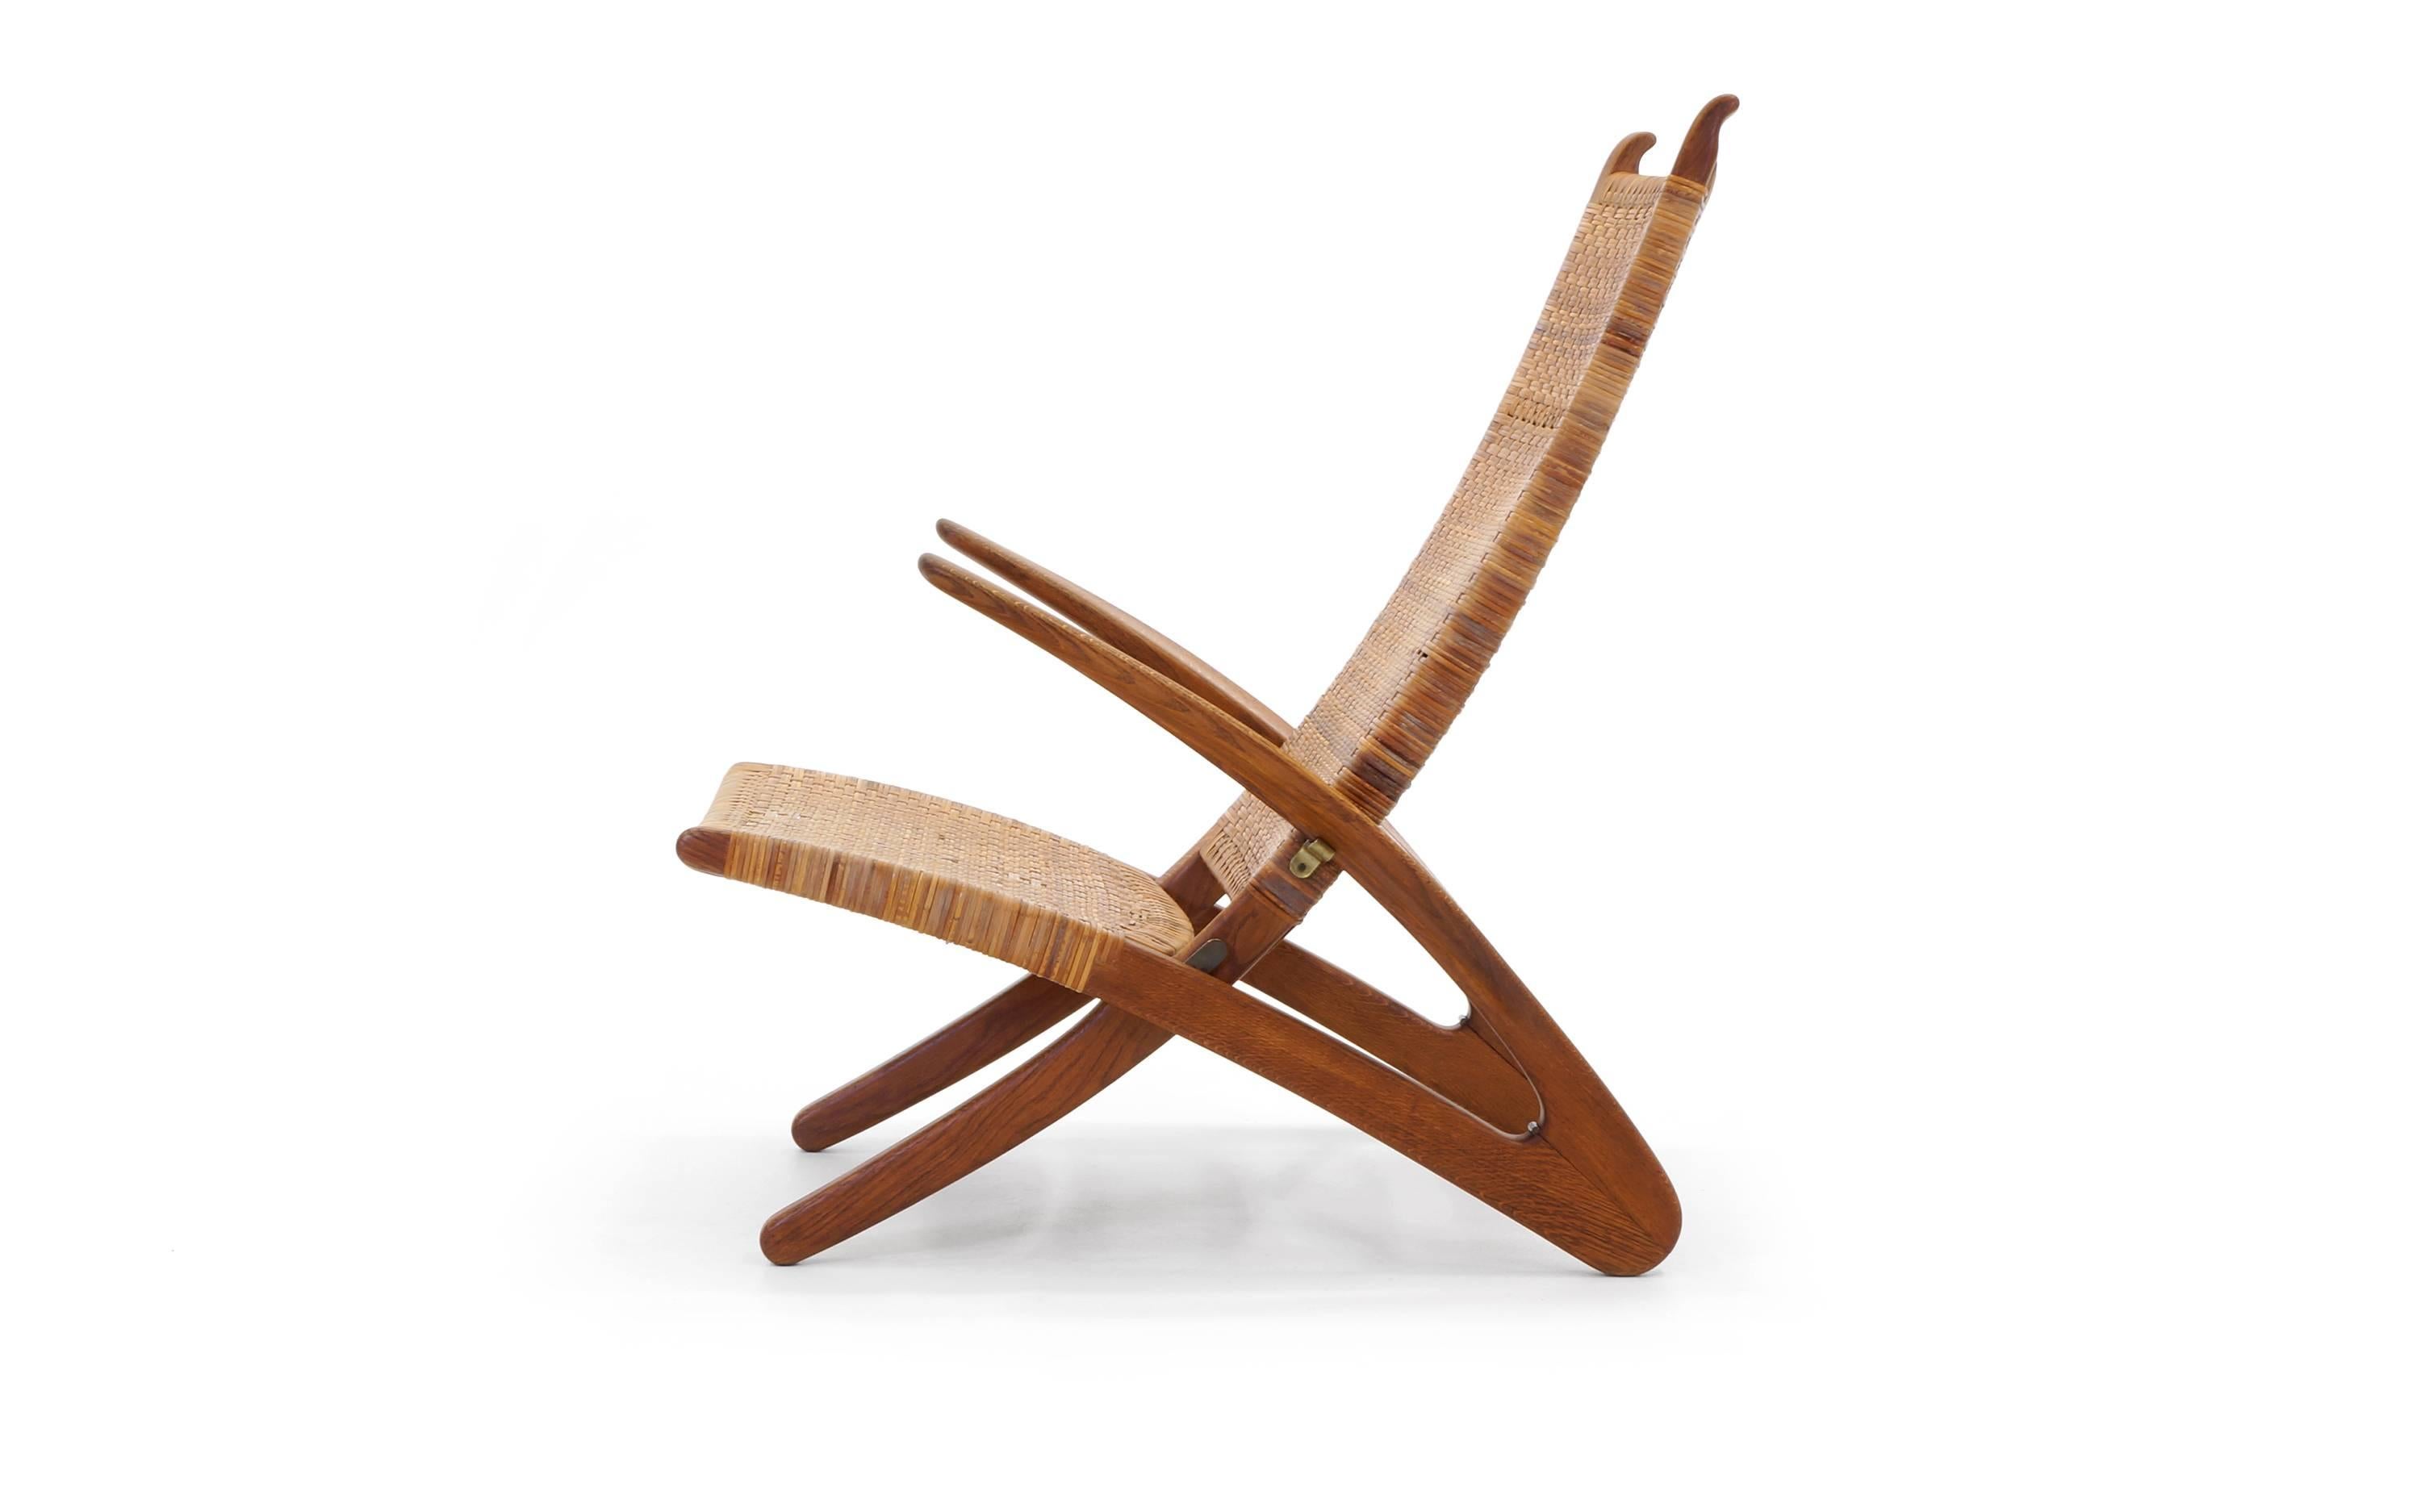 Extremely rare and highly desirable Hans Wegner Dolphin chair. There are only a few known examples of this work as it was never put into production. Hand-carved white oak frame with brass fittings and handwoven cane. This example has had only one